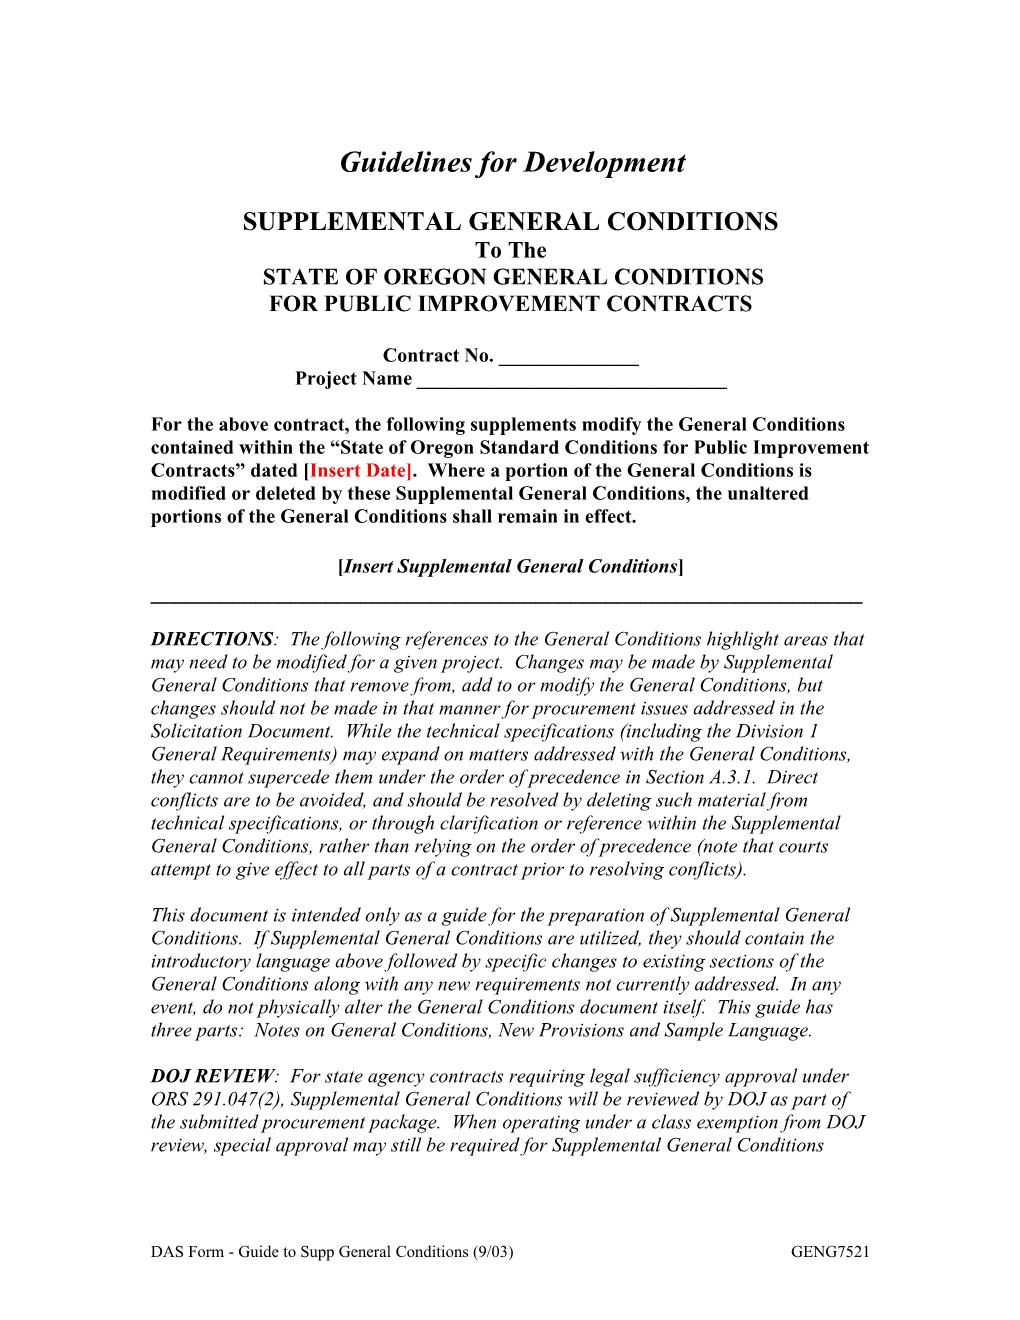 General Conditions - Supplemental Guidelines